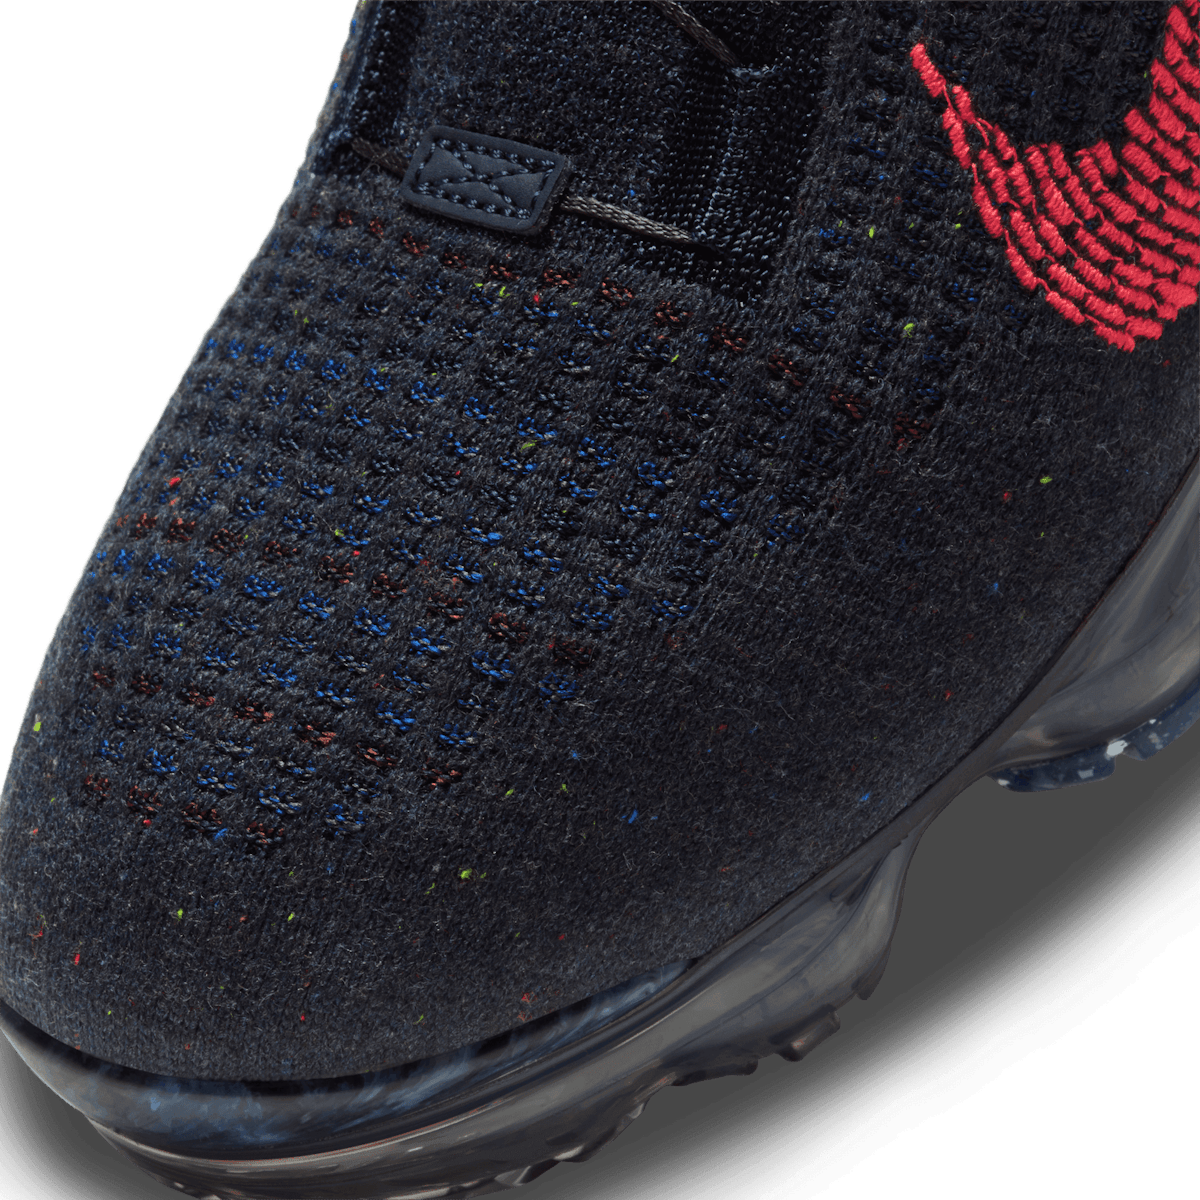 Nike Air VaporMax 2020 Flyknit 'Obsidian Siren Red' Angle 4